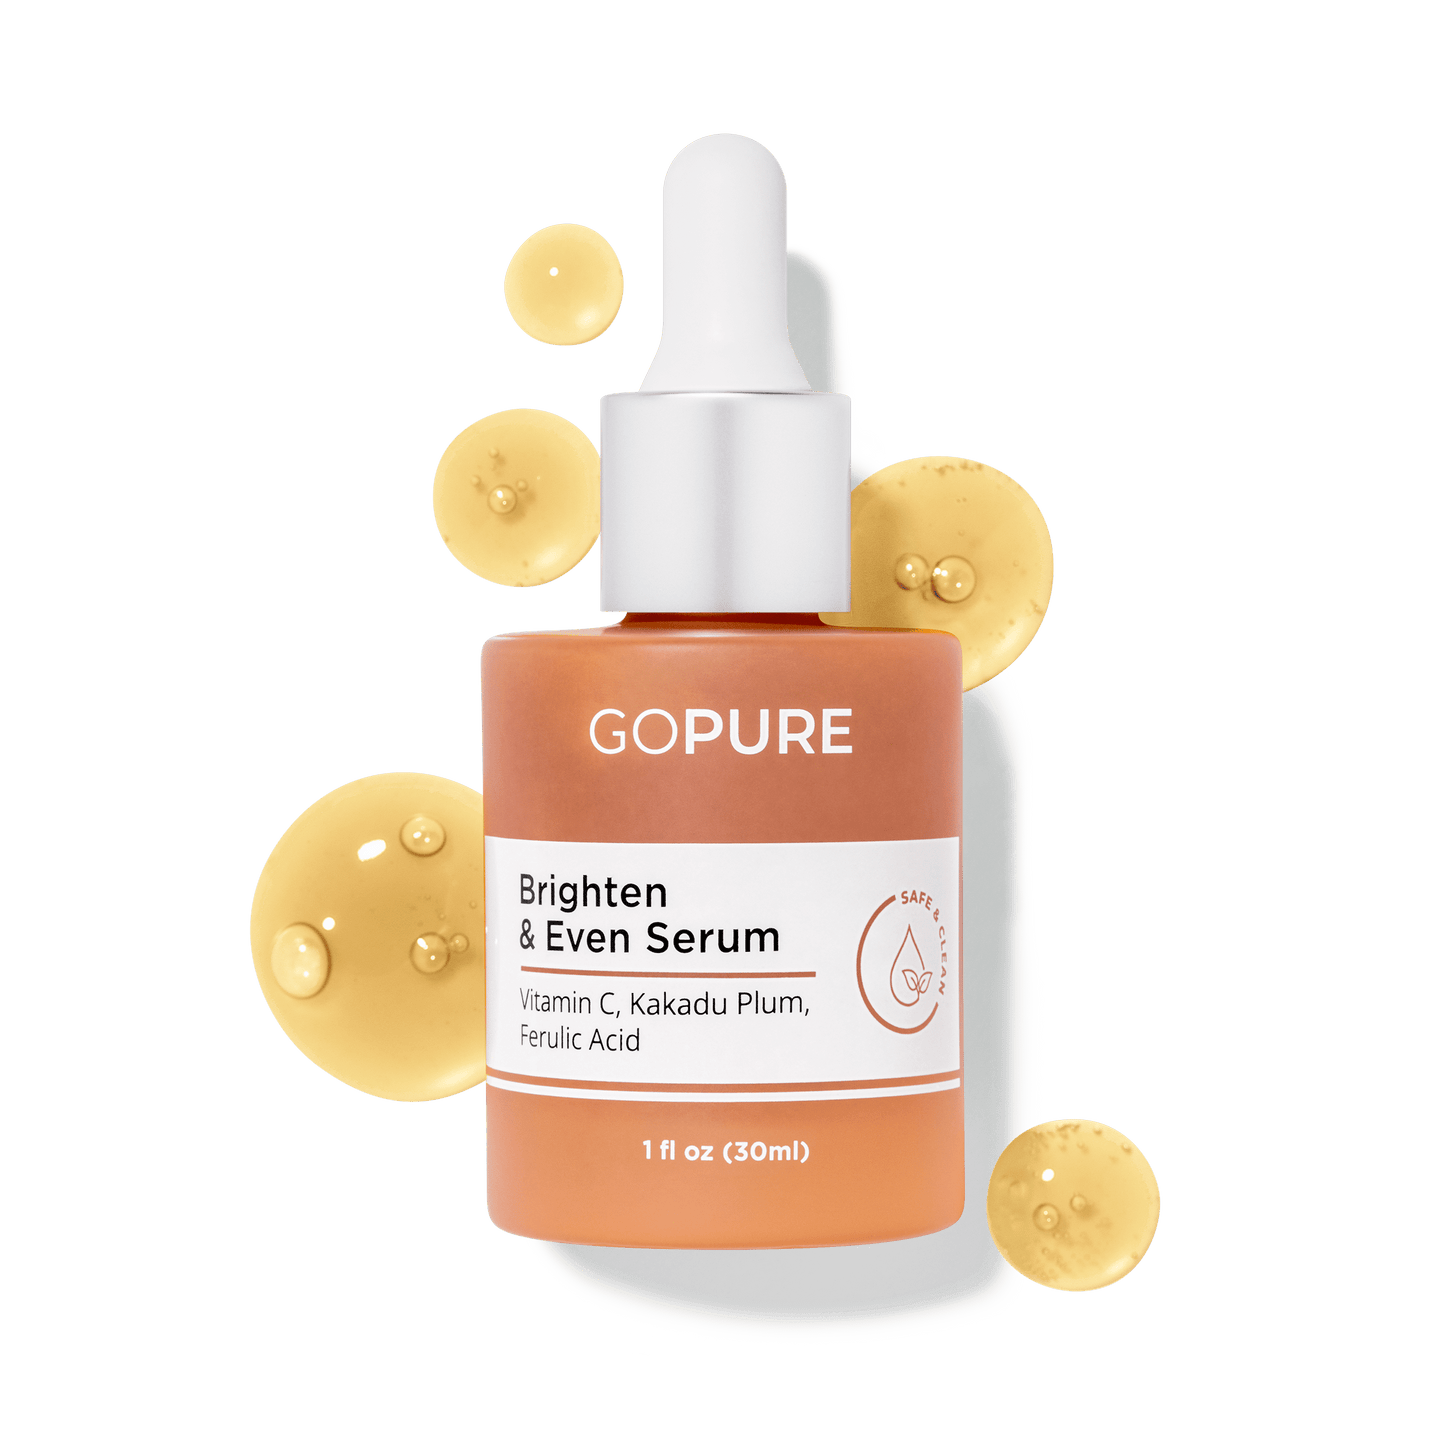  1 fl oz. Peach-colored bottle of GoPure Brighten & Even Serum with white dropper, surrounded by golden yellow serum droplets. Ingredients contain Vitamin C, Kakadu Plum and Ferulic Acid.